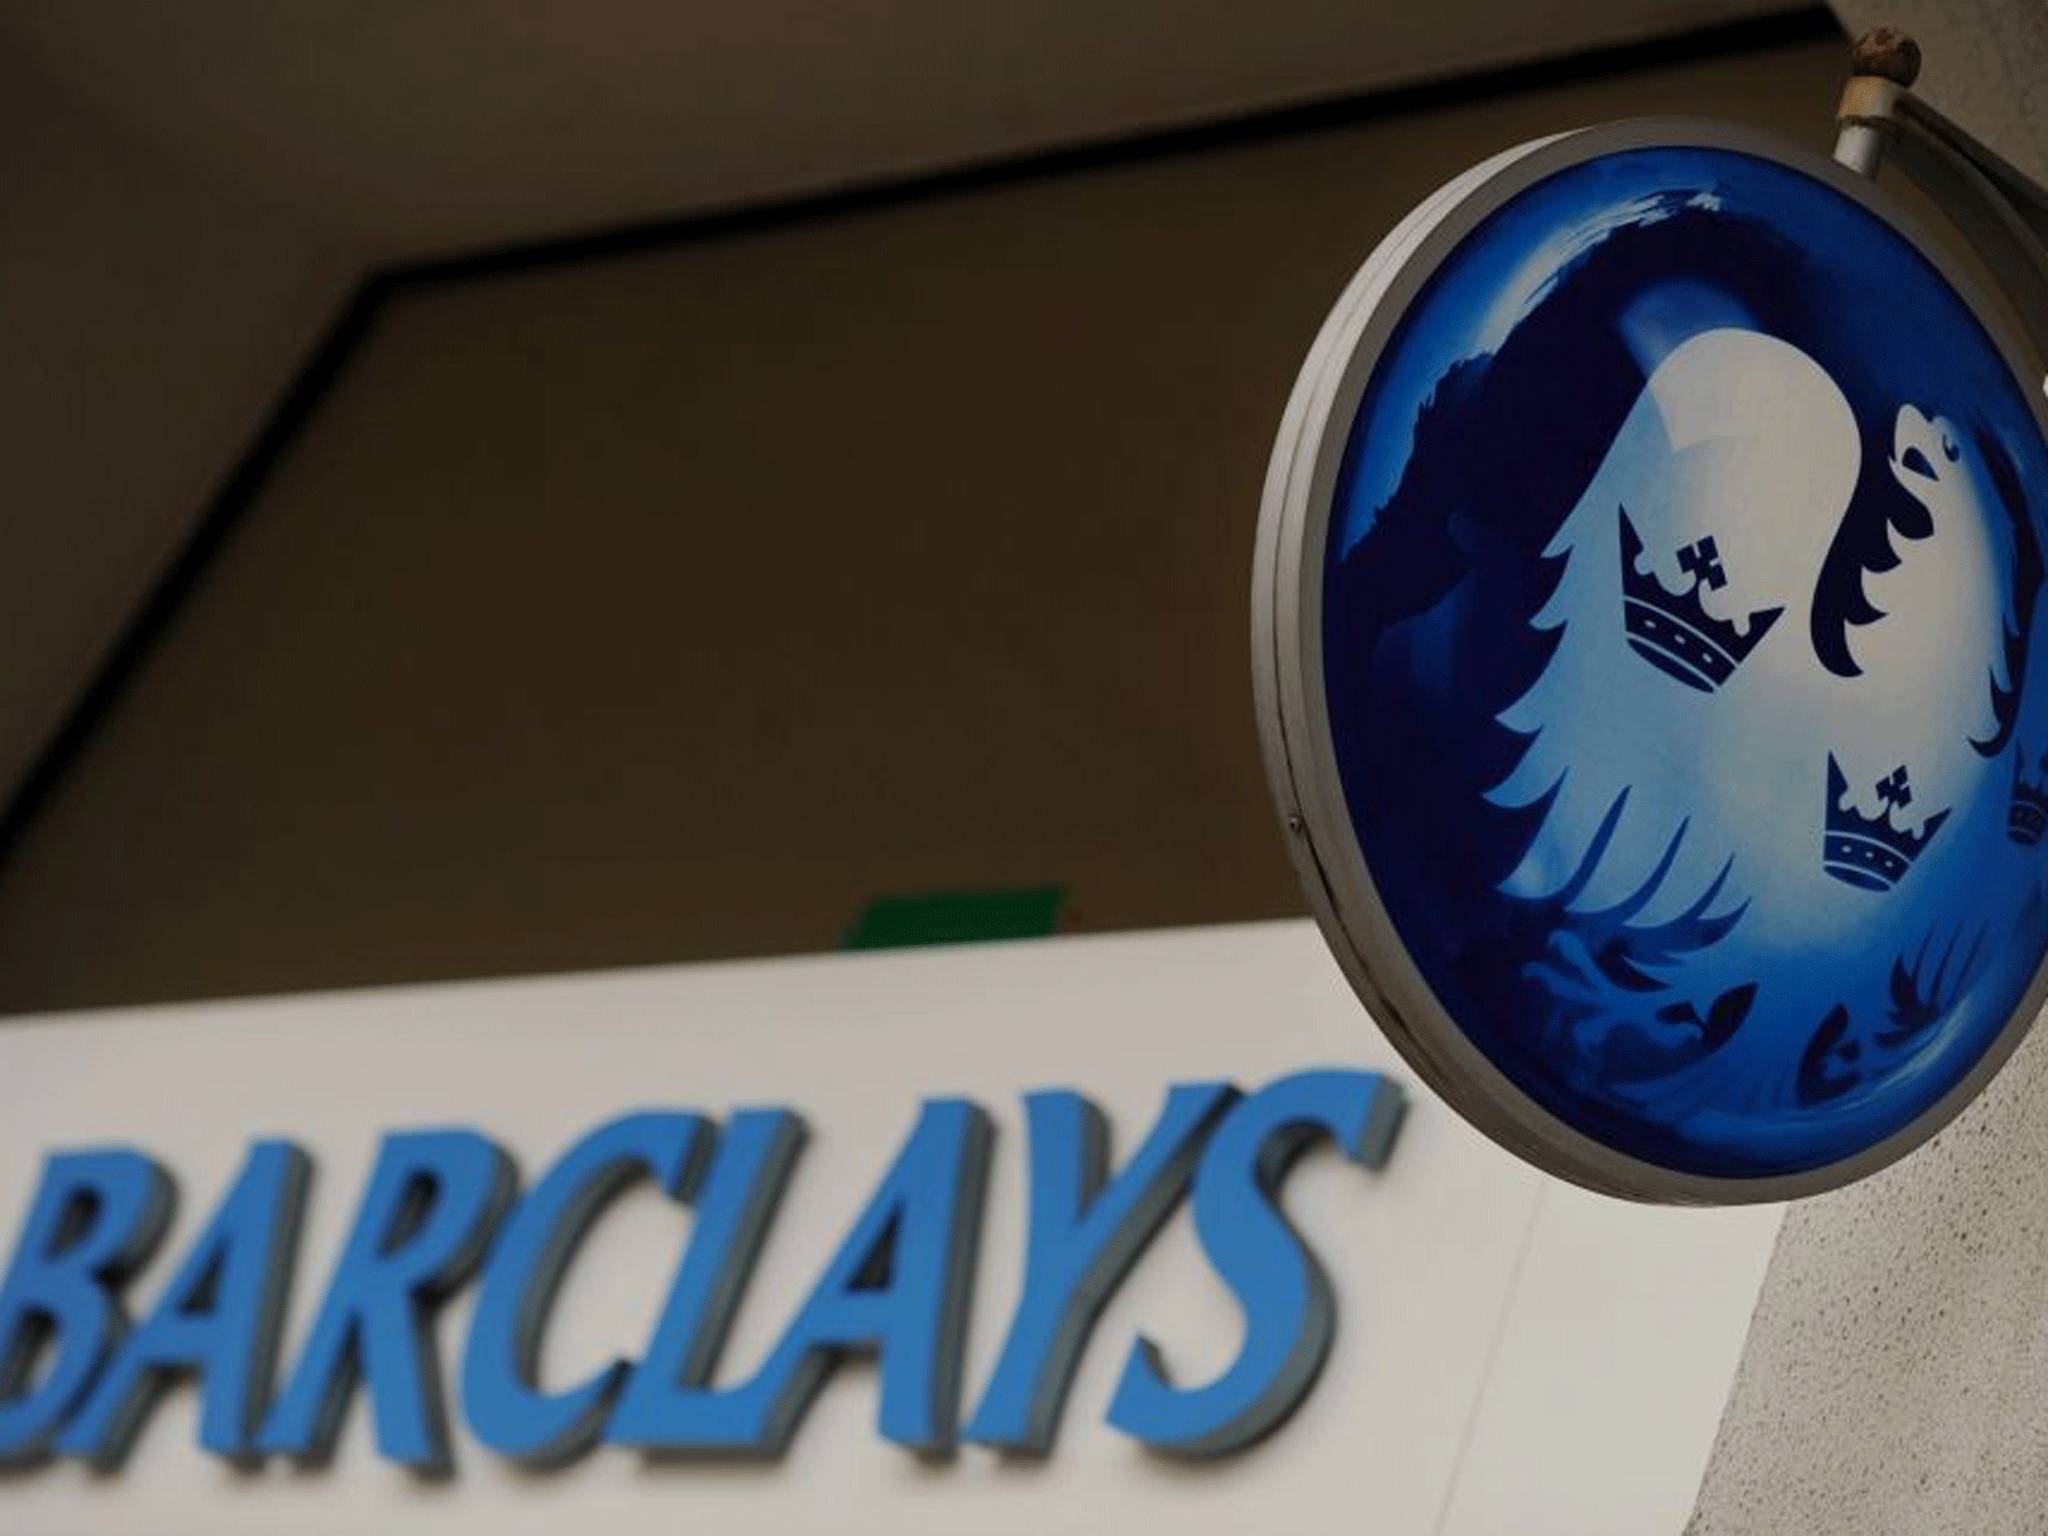 Barclays is to axe 1,700 jobs from across its branch network, according to the Unite union.